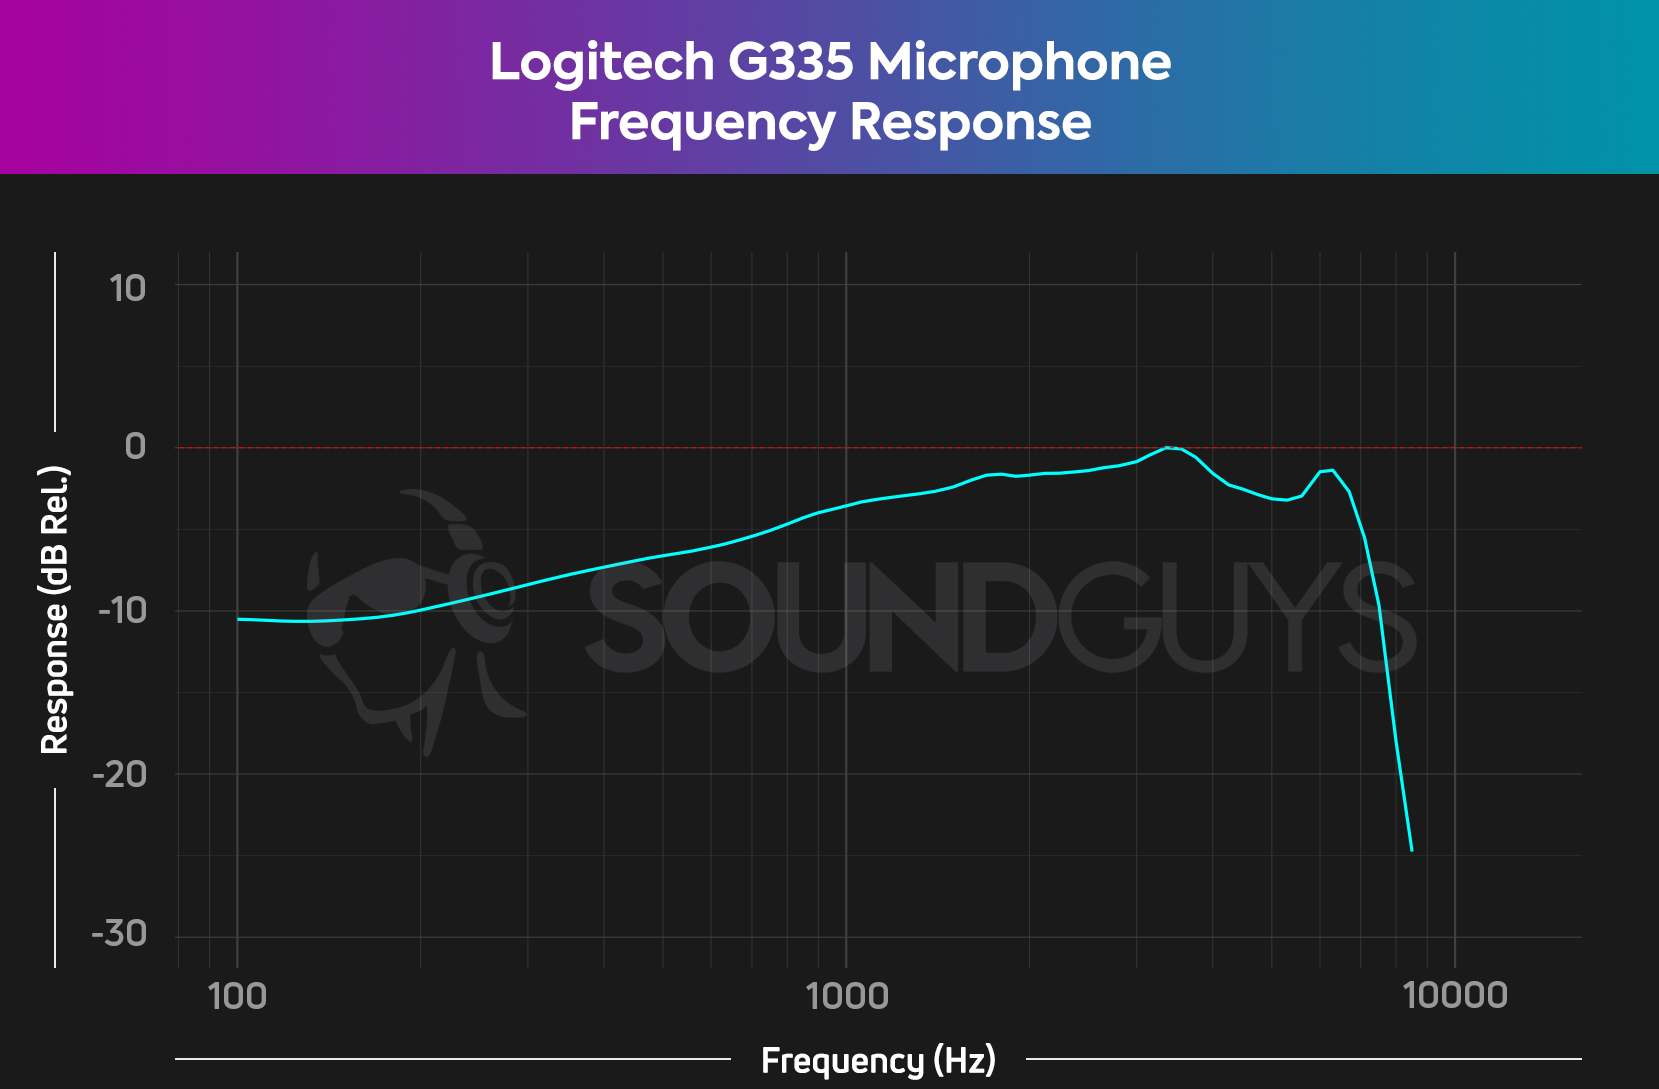 The Logitech G335 microphone frequency response chart showing a fairly even rise up to around 8KHz and then a sharp falloff.